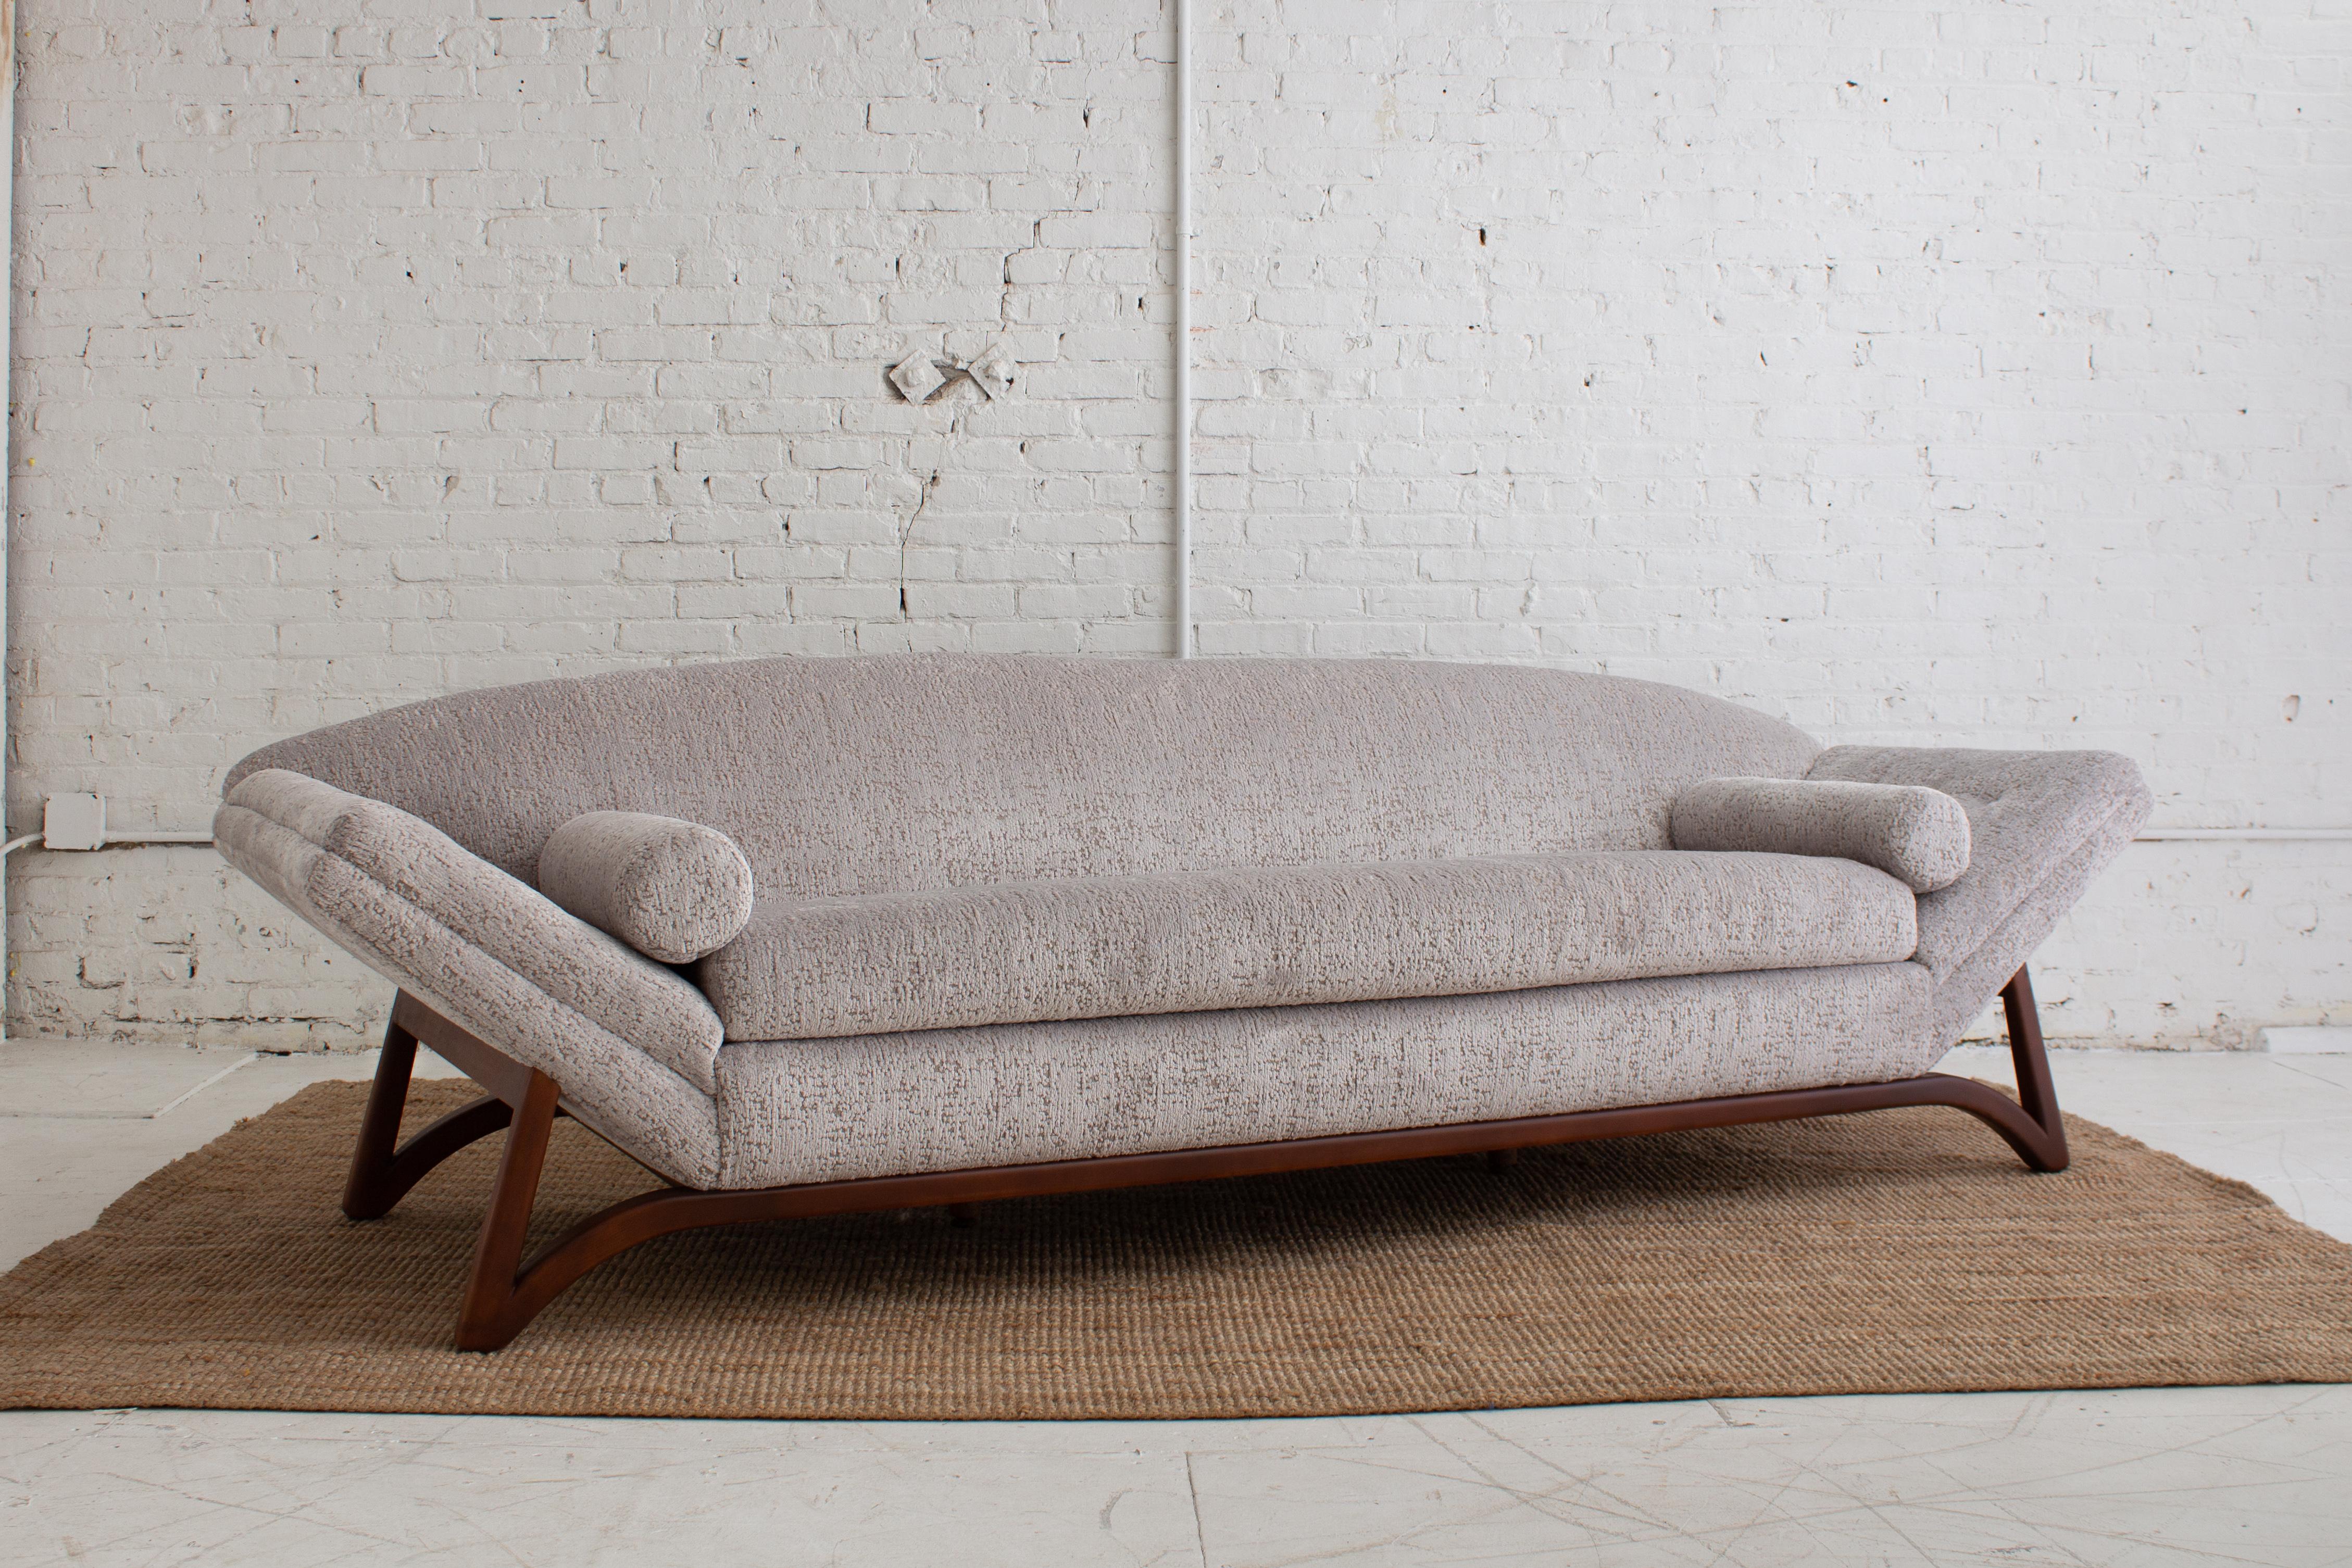 A Mid-Century Modern “gondola” sofa in the style of Adrian Pearsall. Complete with tufted arms and bolster pillows. Newly restored. Upholstered in Holly Hunt “Plushy,” a silver and beige textured chenille. New foam and refinished frame.